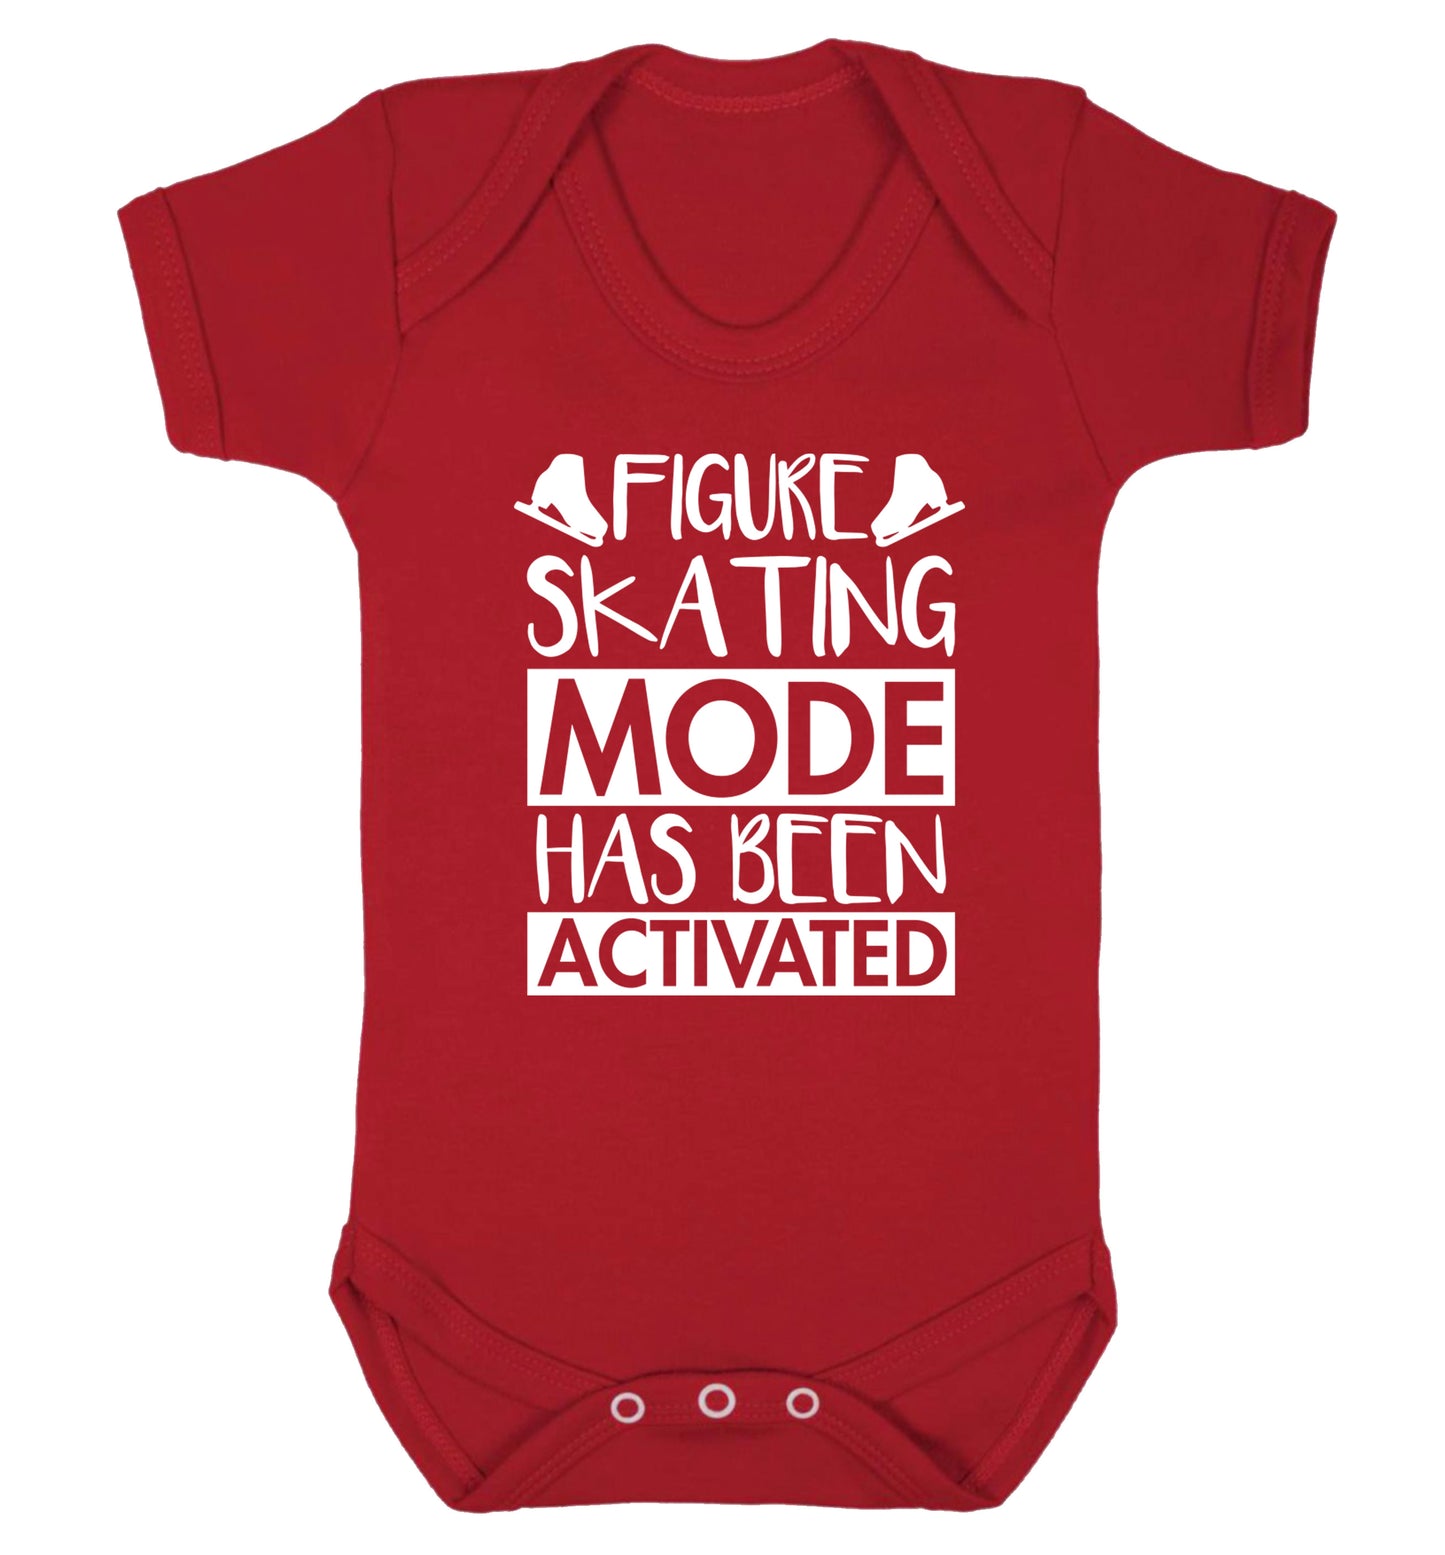 Figure skating mode activated Baby Vest red 18-24 months